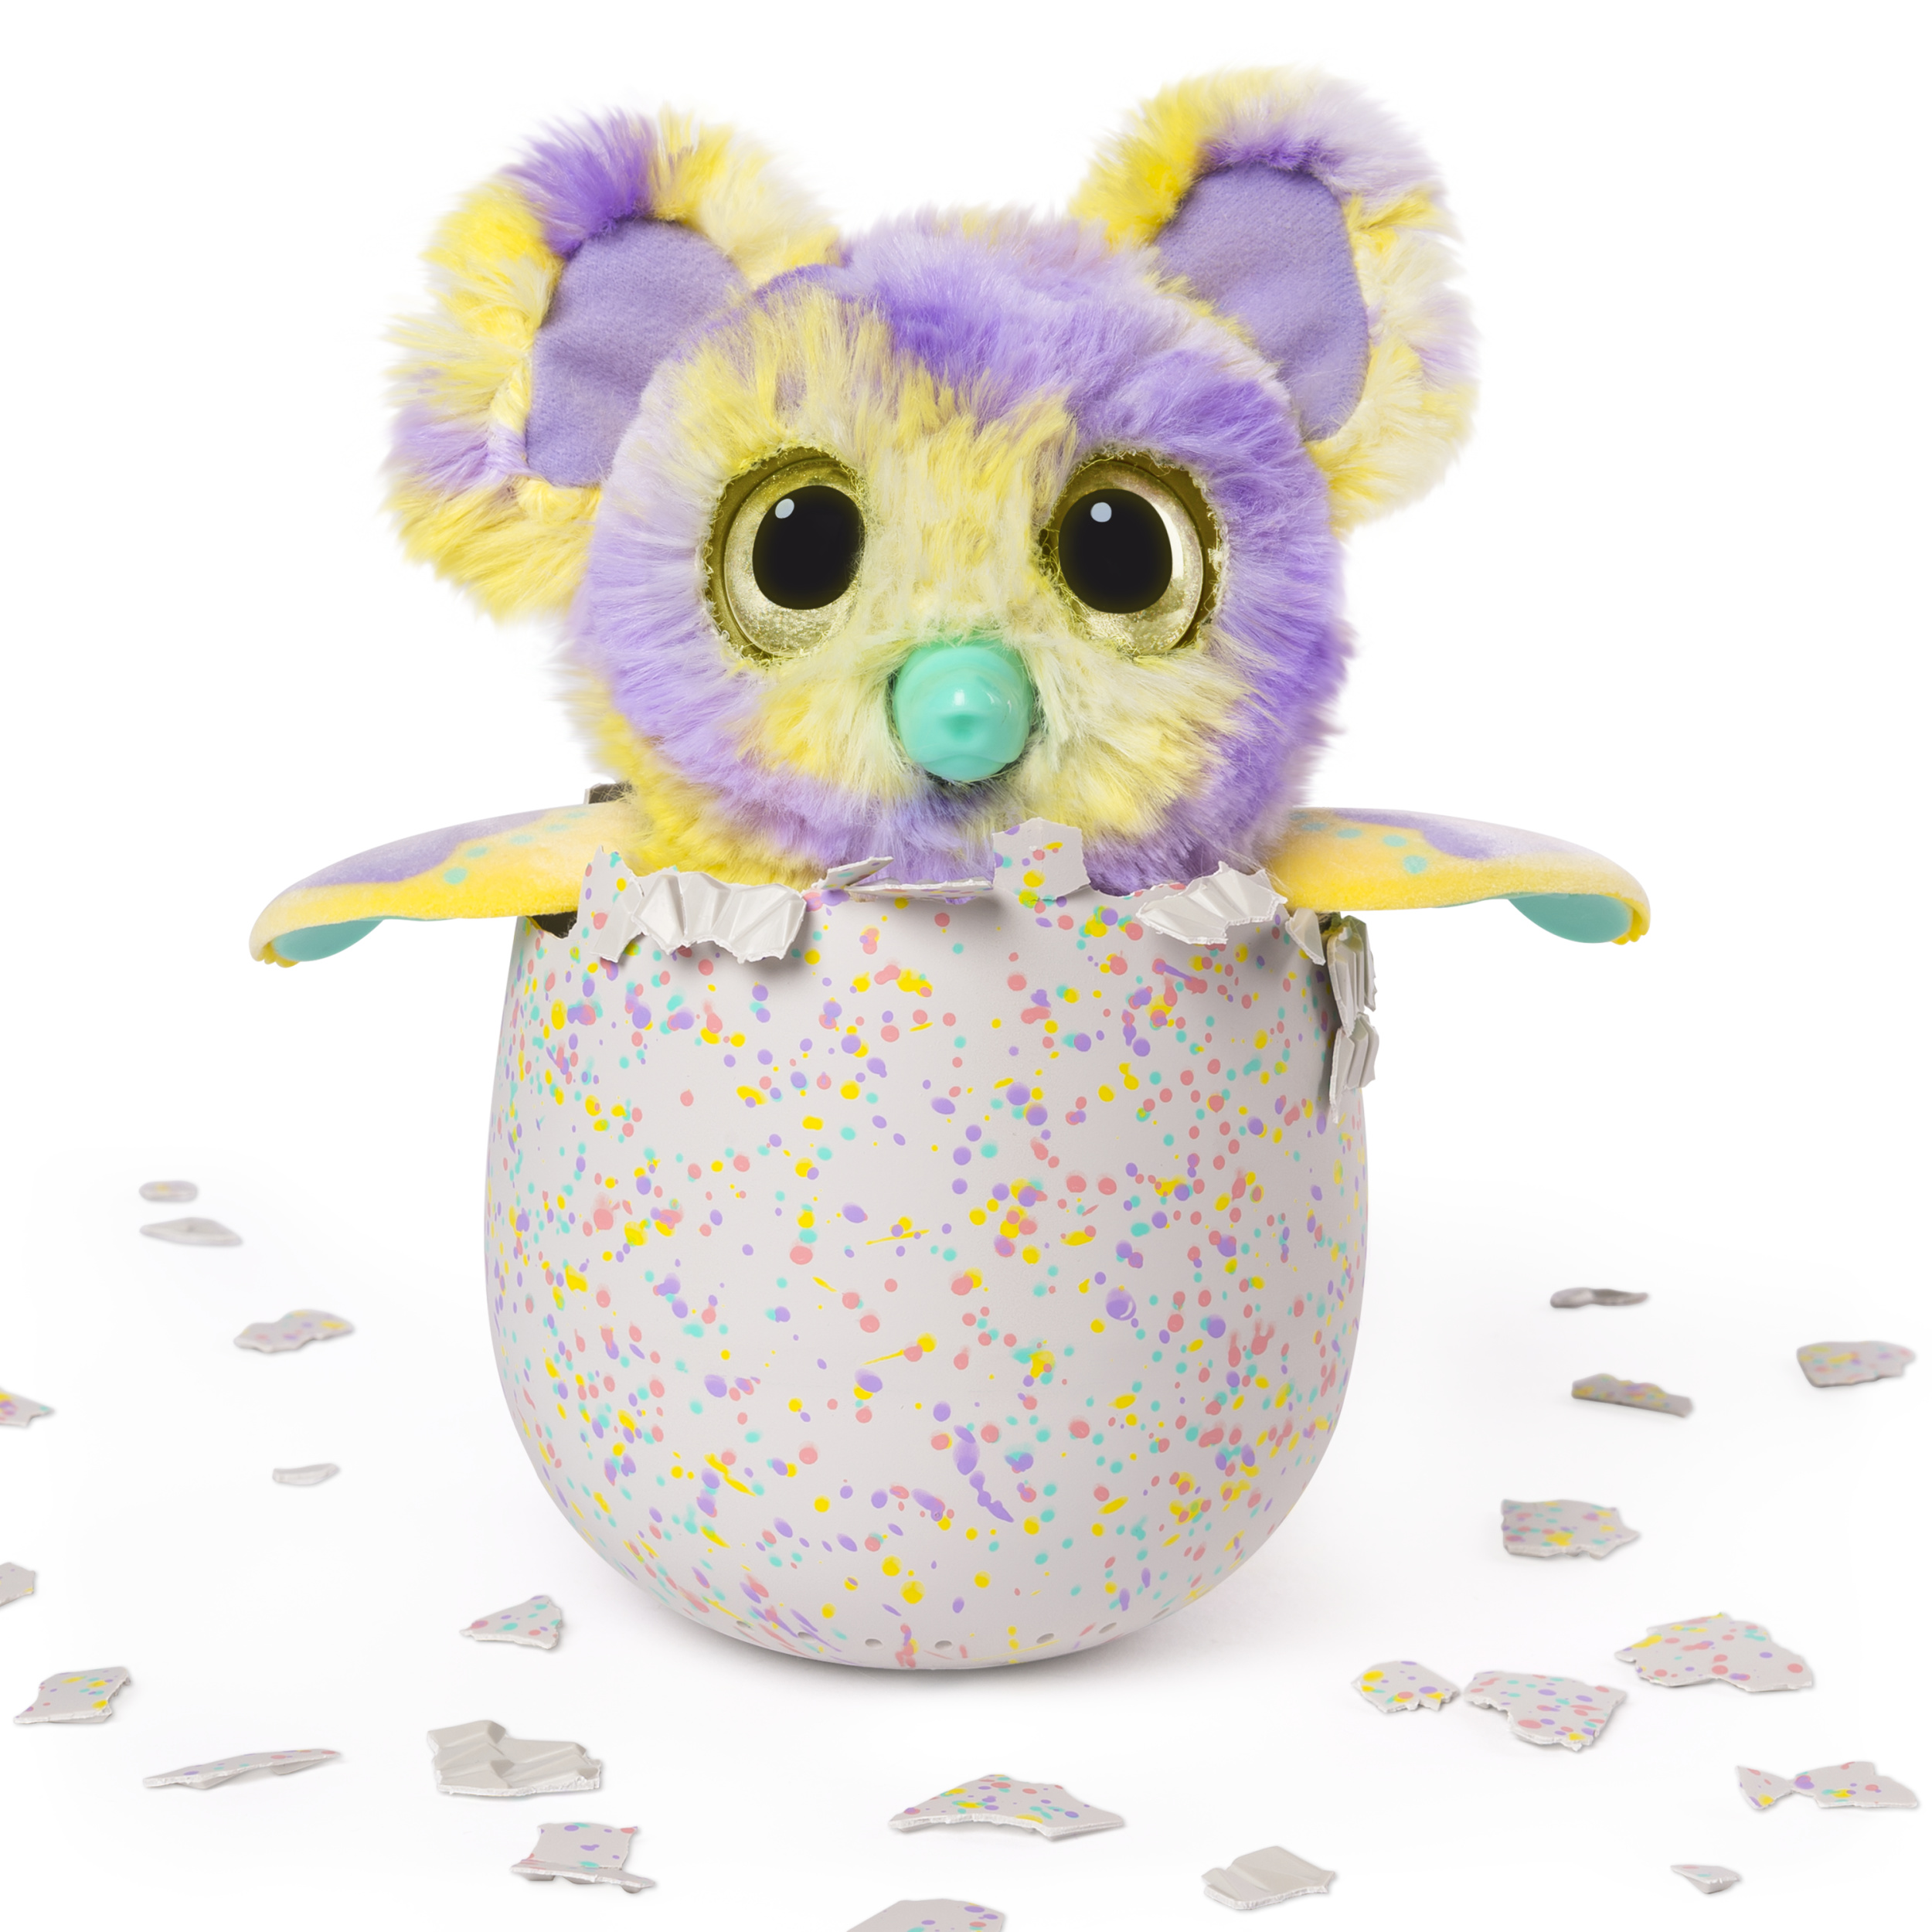 Hatchimals Mystery Egg, Hatch 1 of 4 Interactive Mystery Characters (Styles May Vary), Multicolor - image 5 of 10